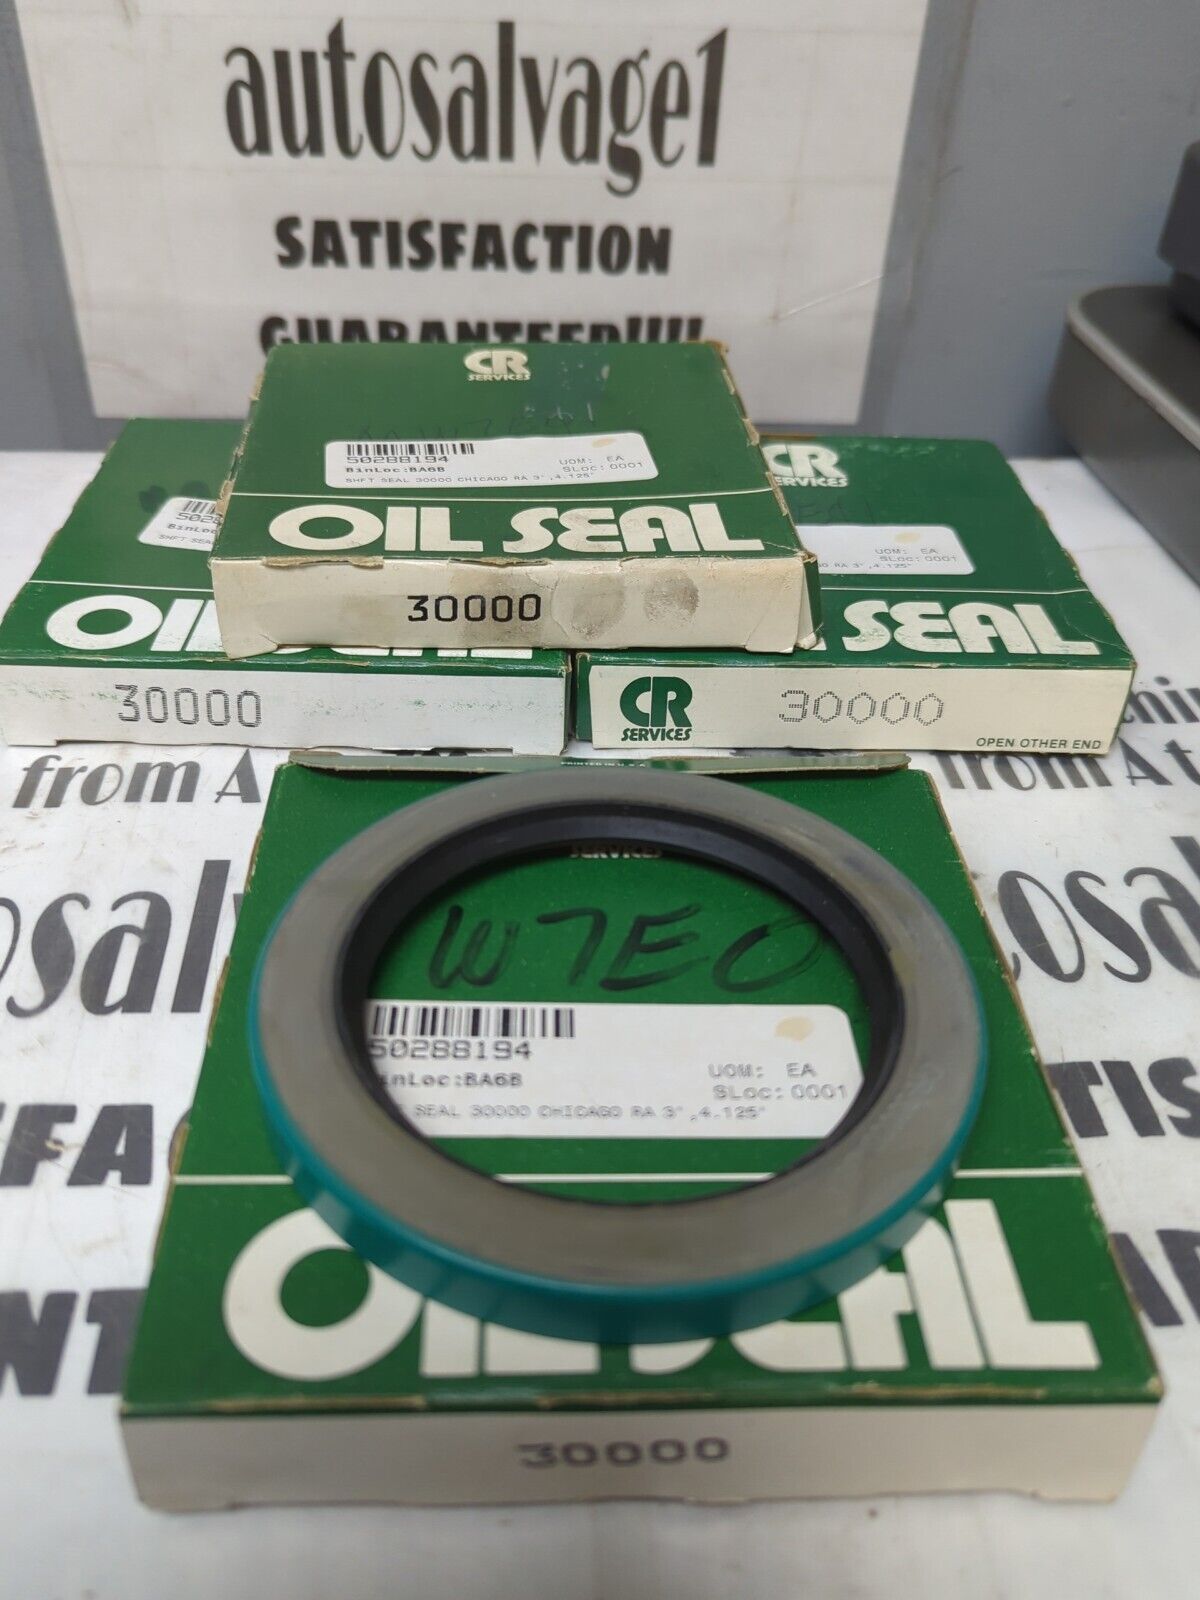 CHICAGO RAWHIDE 30000 OIL SEALS 3" X 4.125"..LOT OF 3..NOS Chicago Rawhide 30000